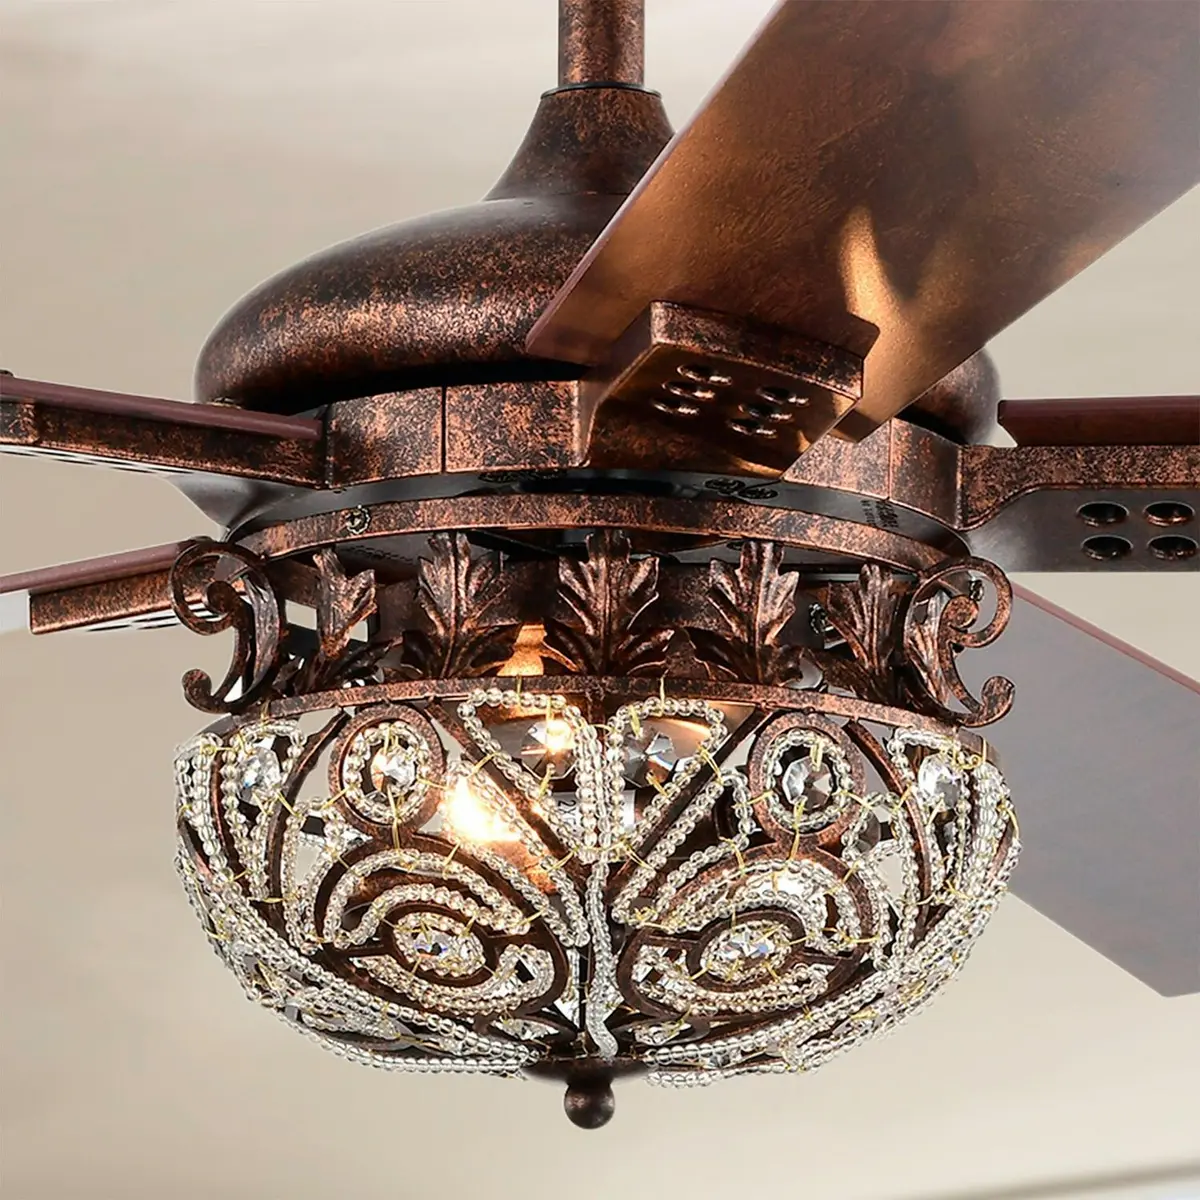 Vintage Style Antique Copper Ceiling Fan 2 Light W Remote Crystal Accent Shade